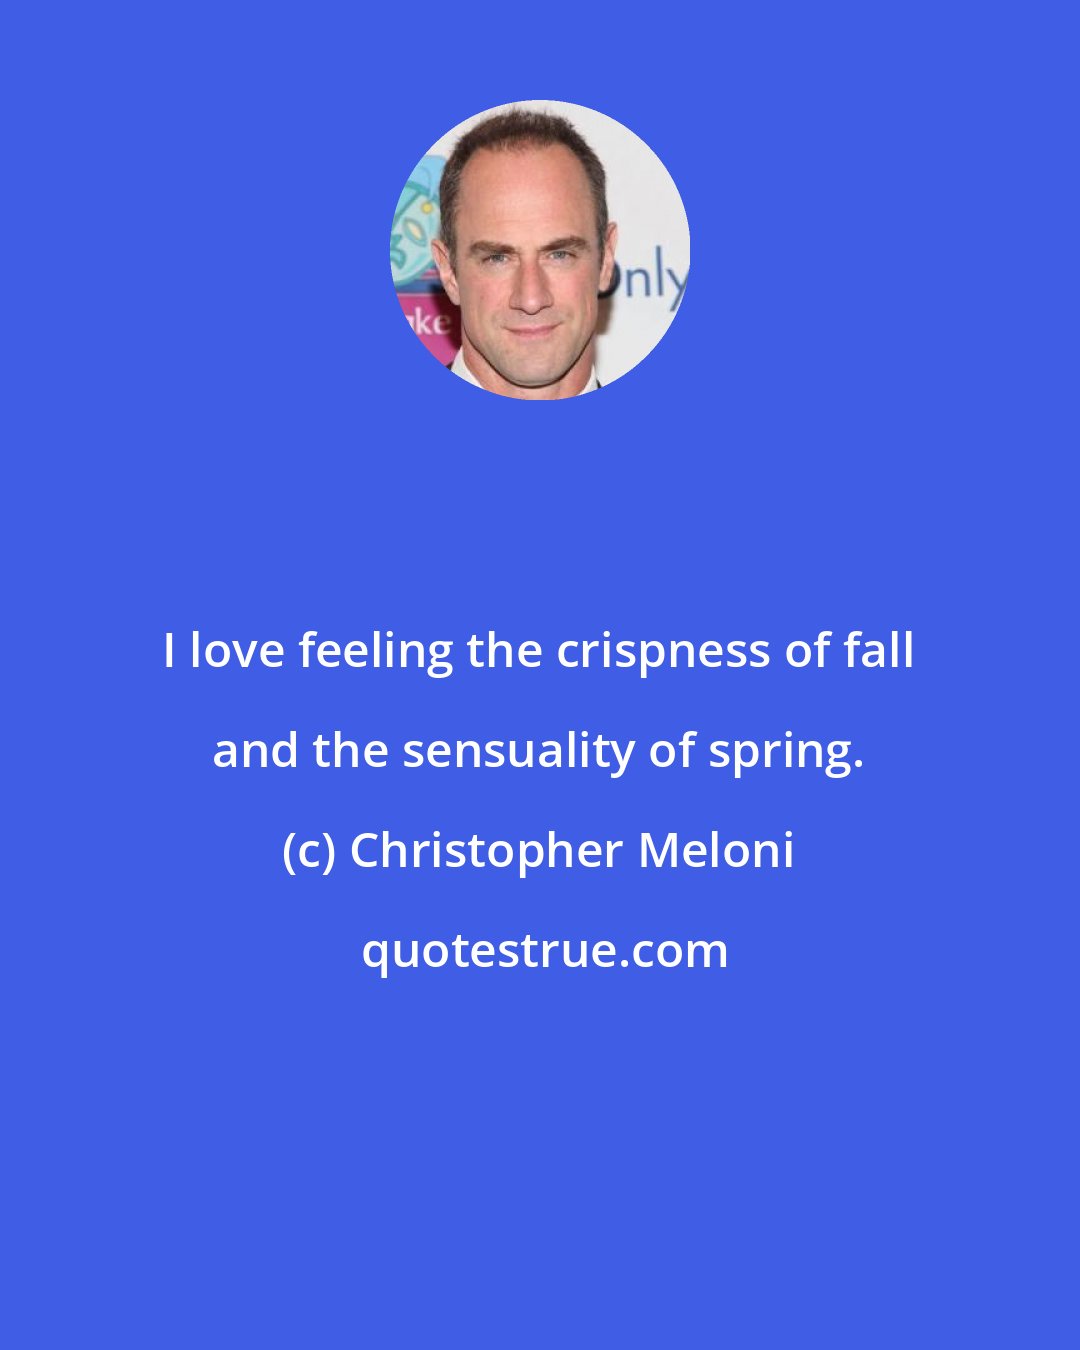 Christopher Meloni: I love feeling the crispness of fall and the sensuality of spring.